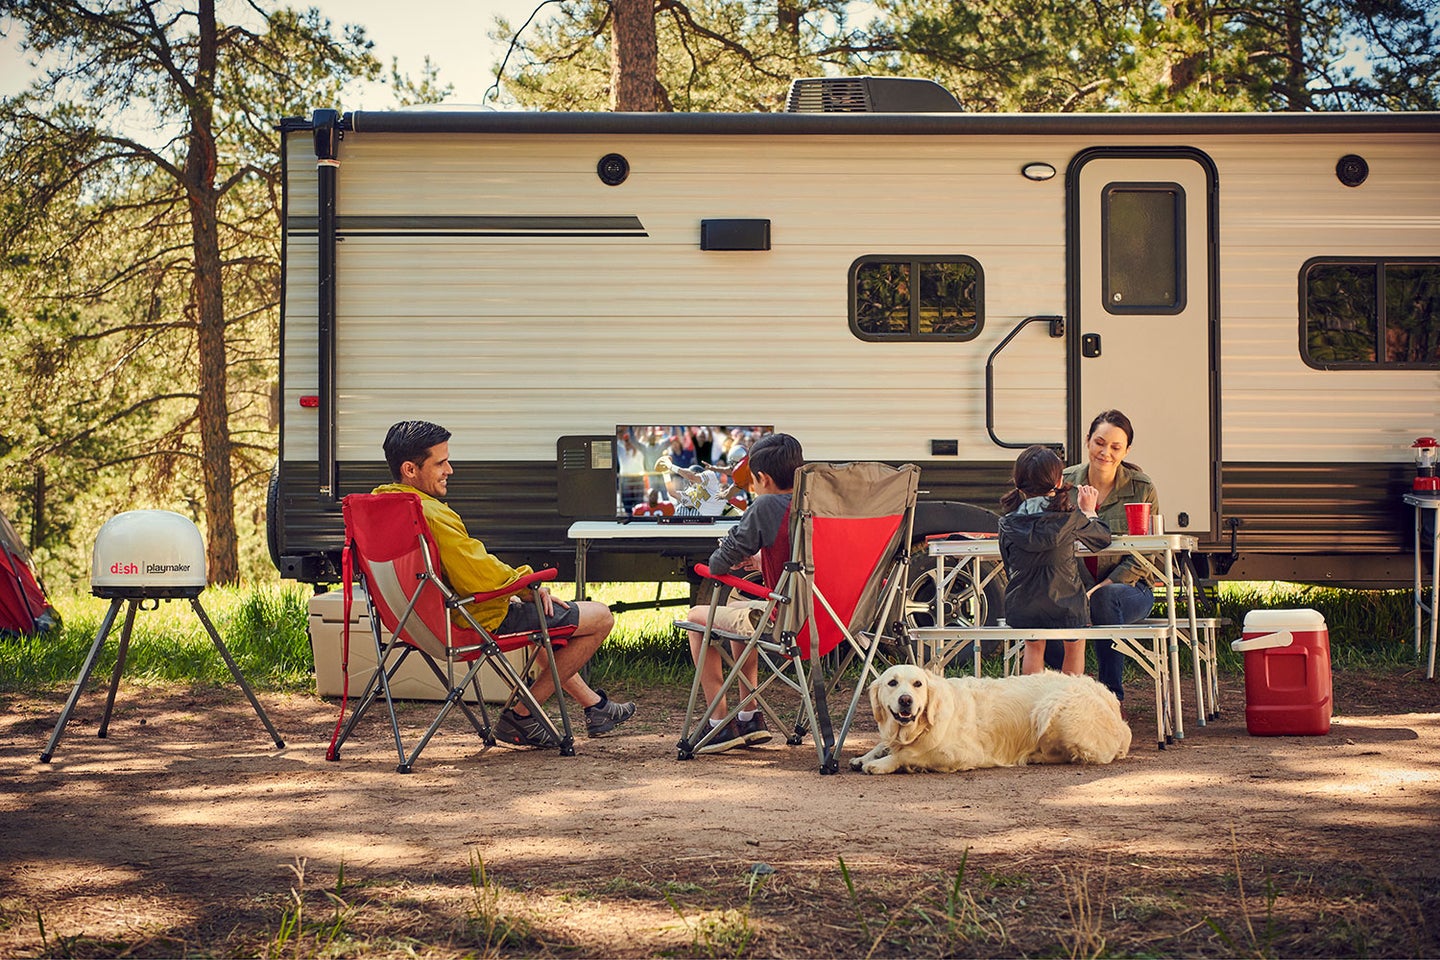 A group of campers sitting outside of an RV.